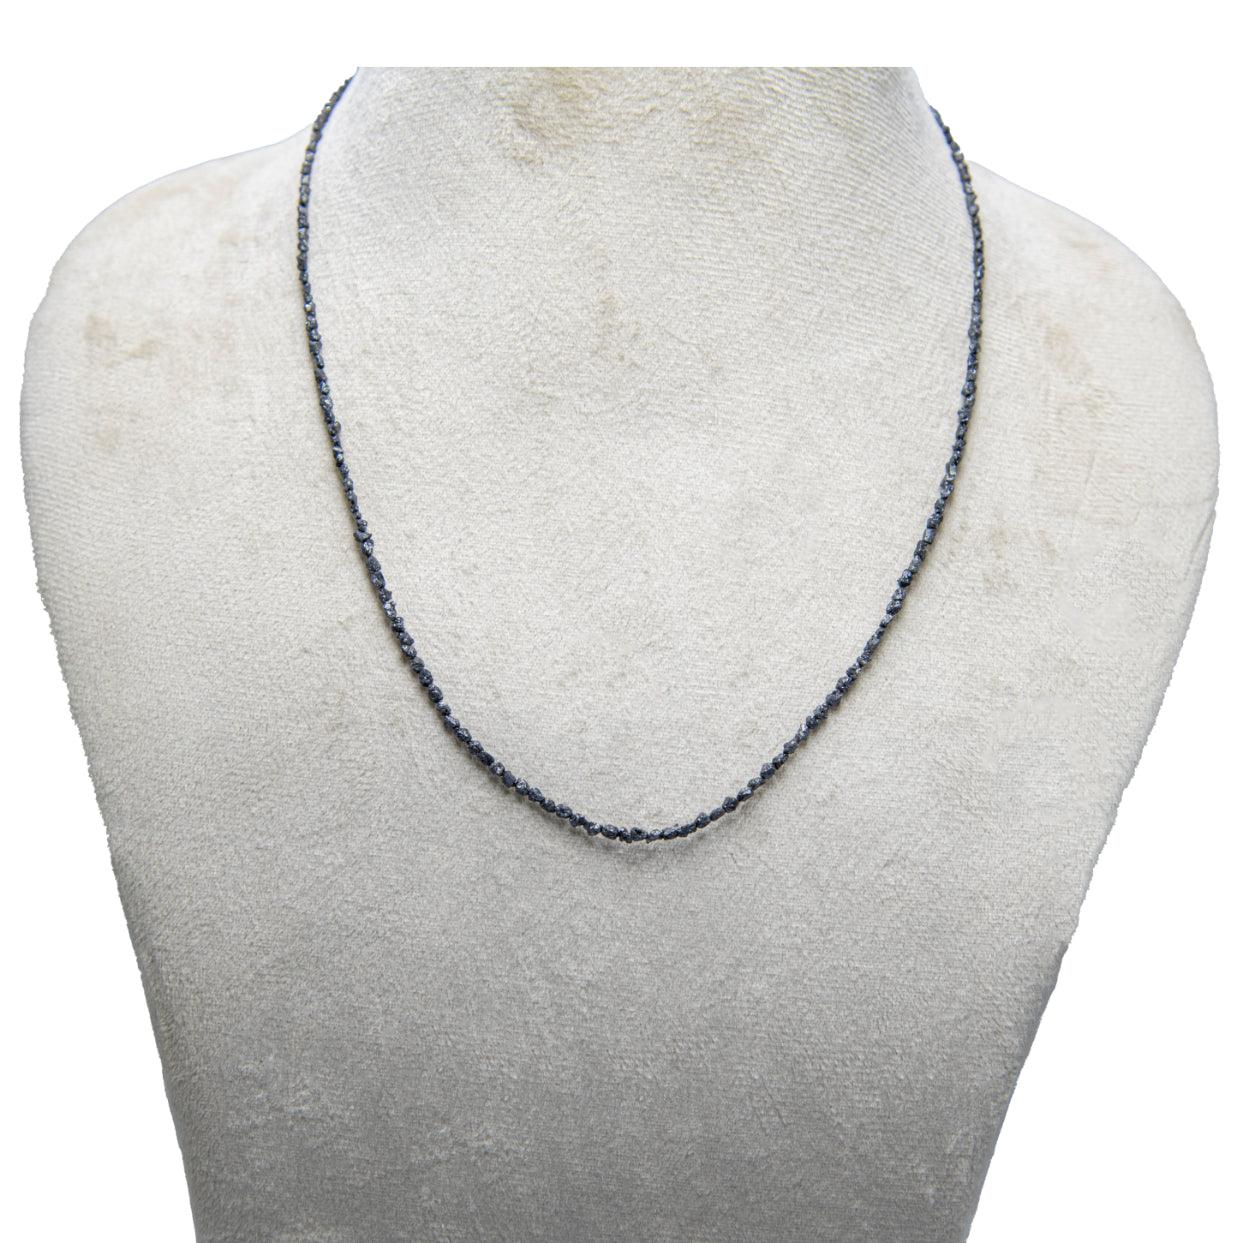 Black Rough Diamond Bead Necklace with Silver Clasp - DeKulture DKW-1378-Small-BNK